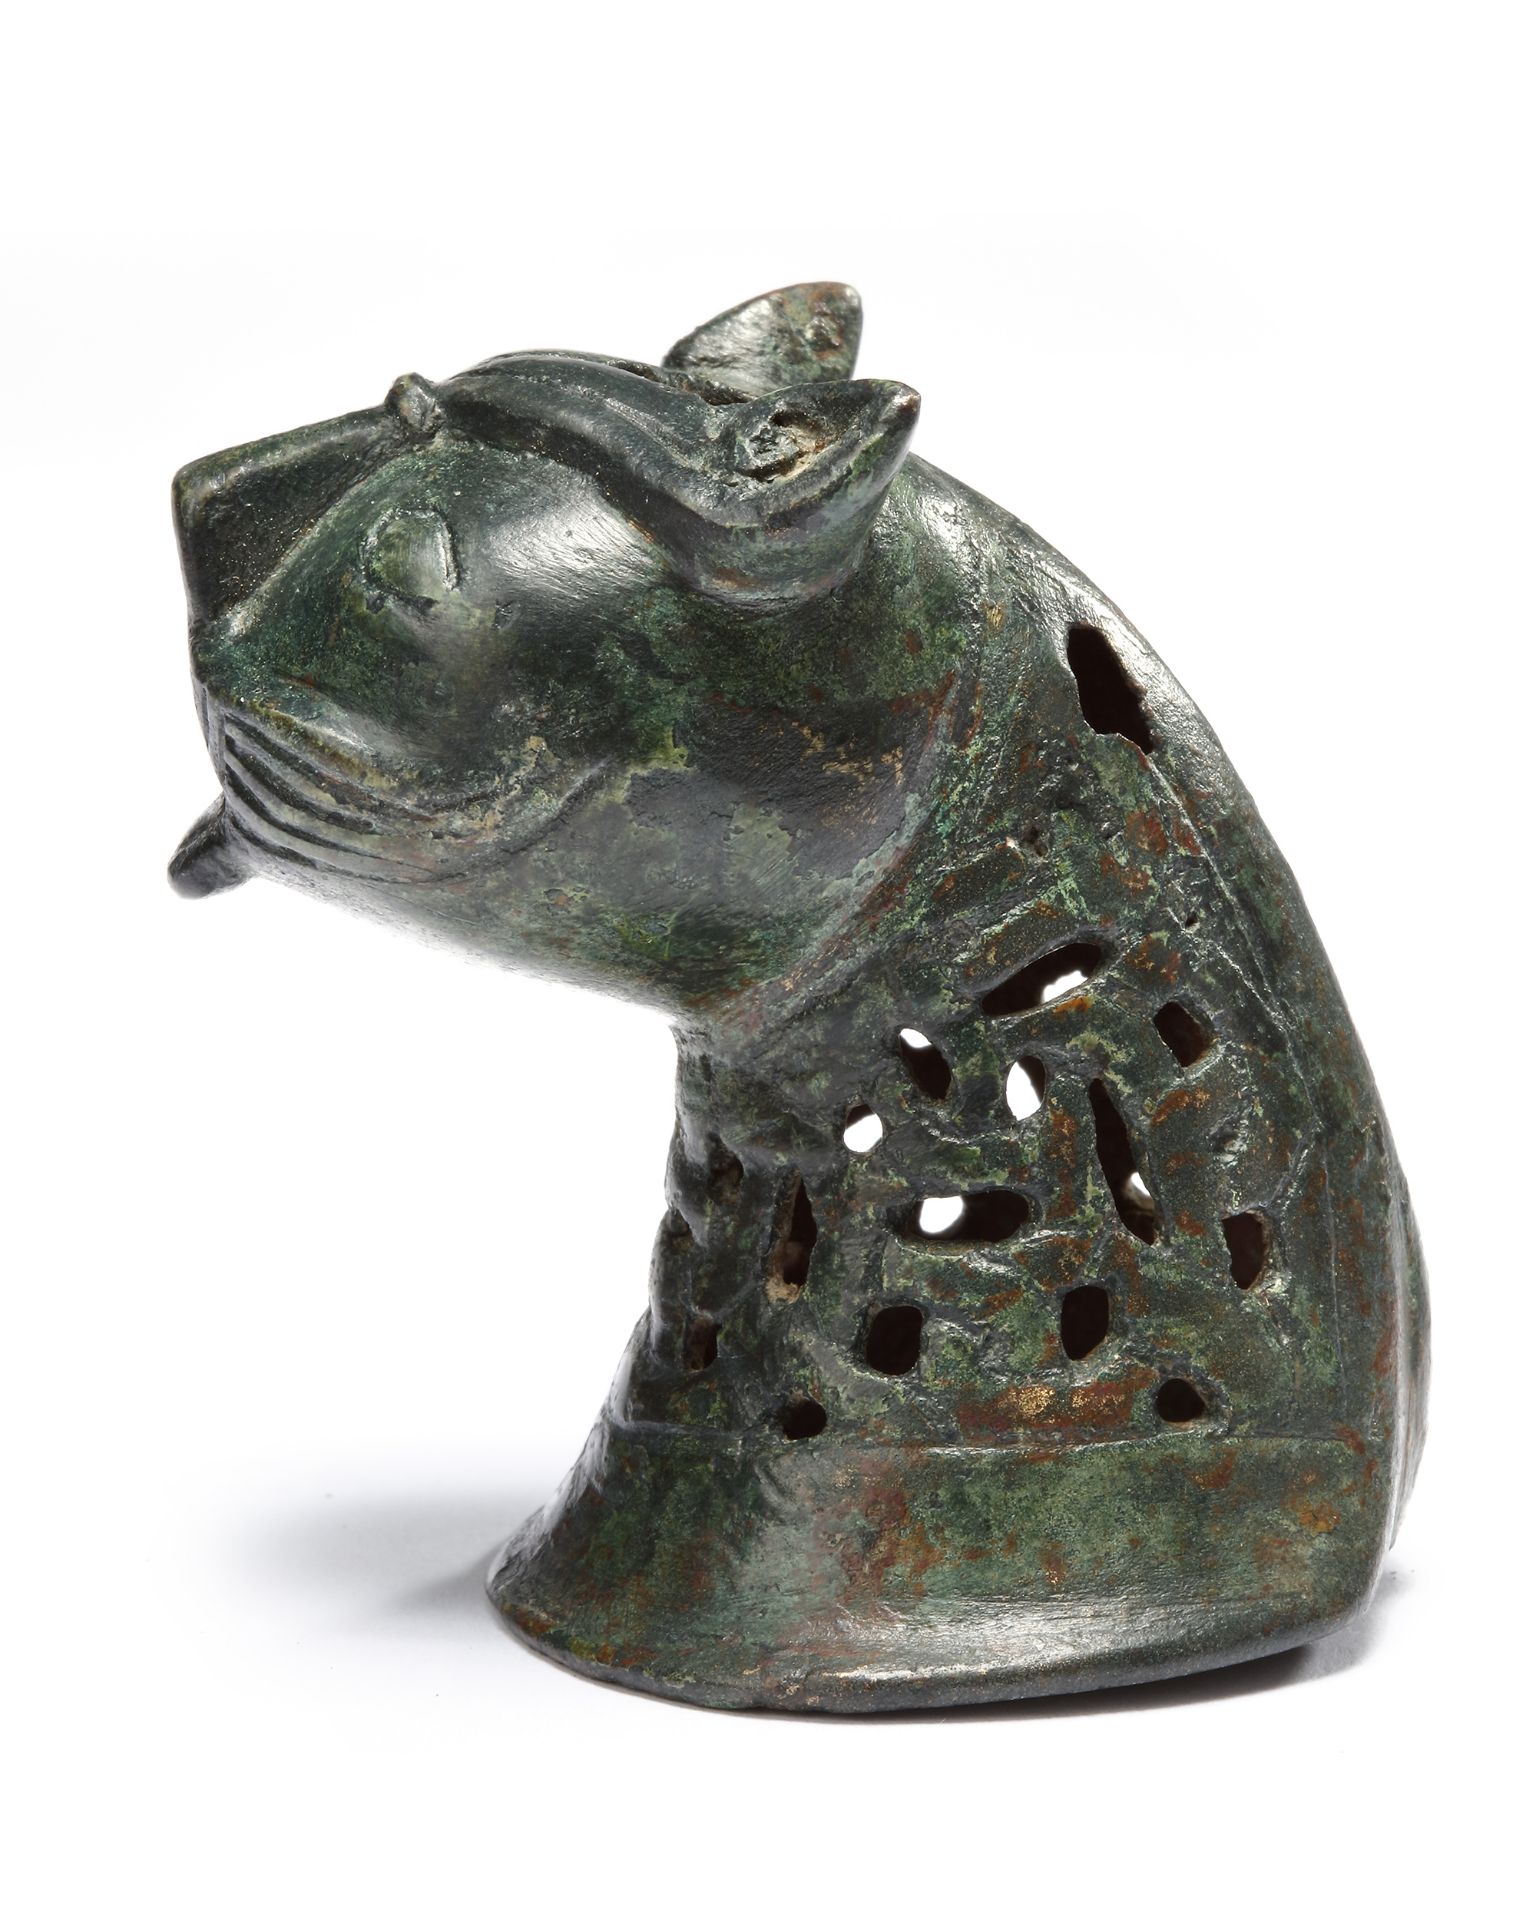 A FINE CAST BRONZE LION HEAD, FROM AN INCENSE BURNER, KHORASAN, 11TH-12TH CENTURY - Image 2 of 8